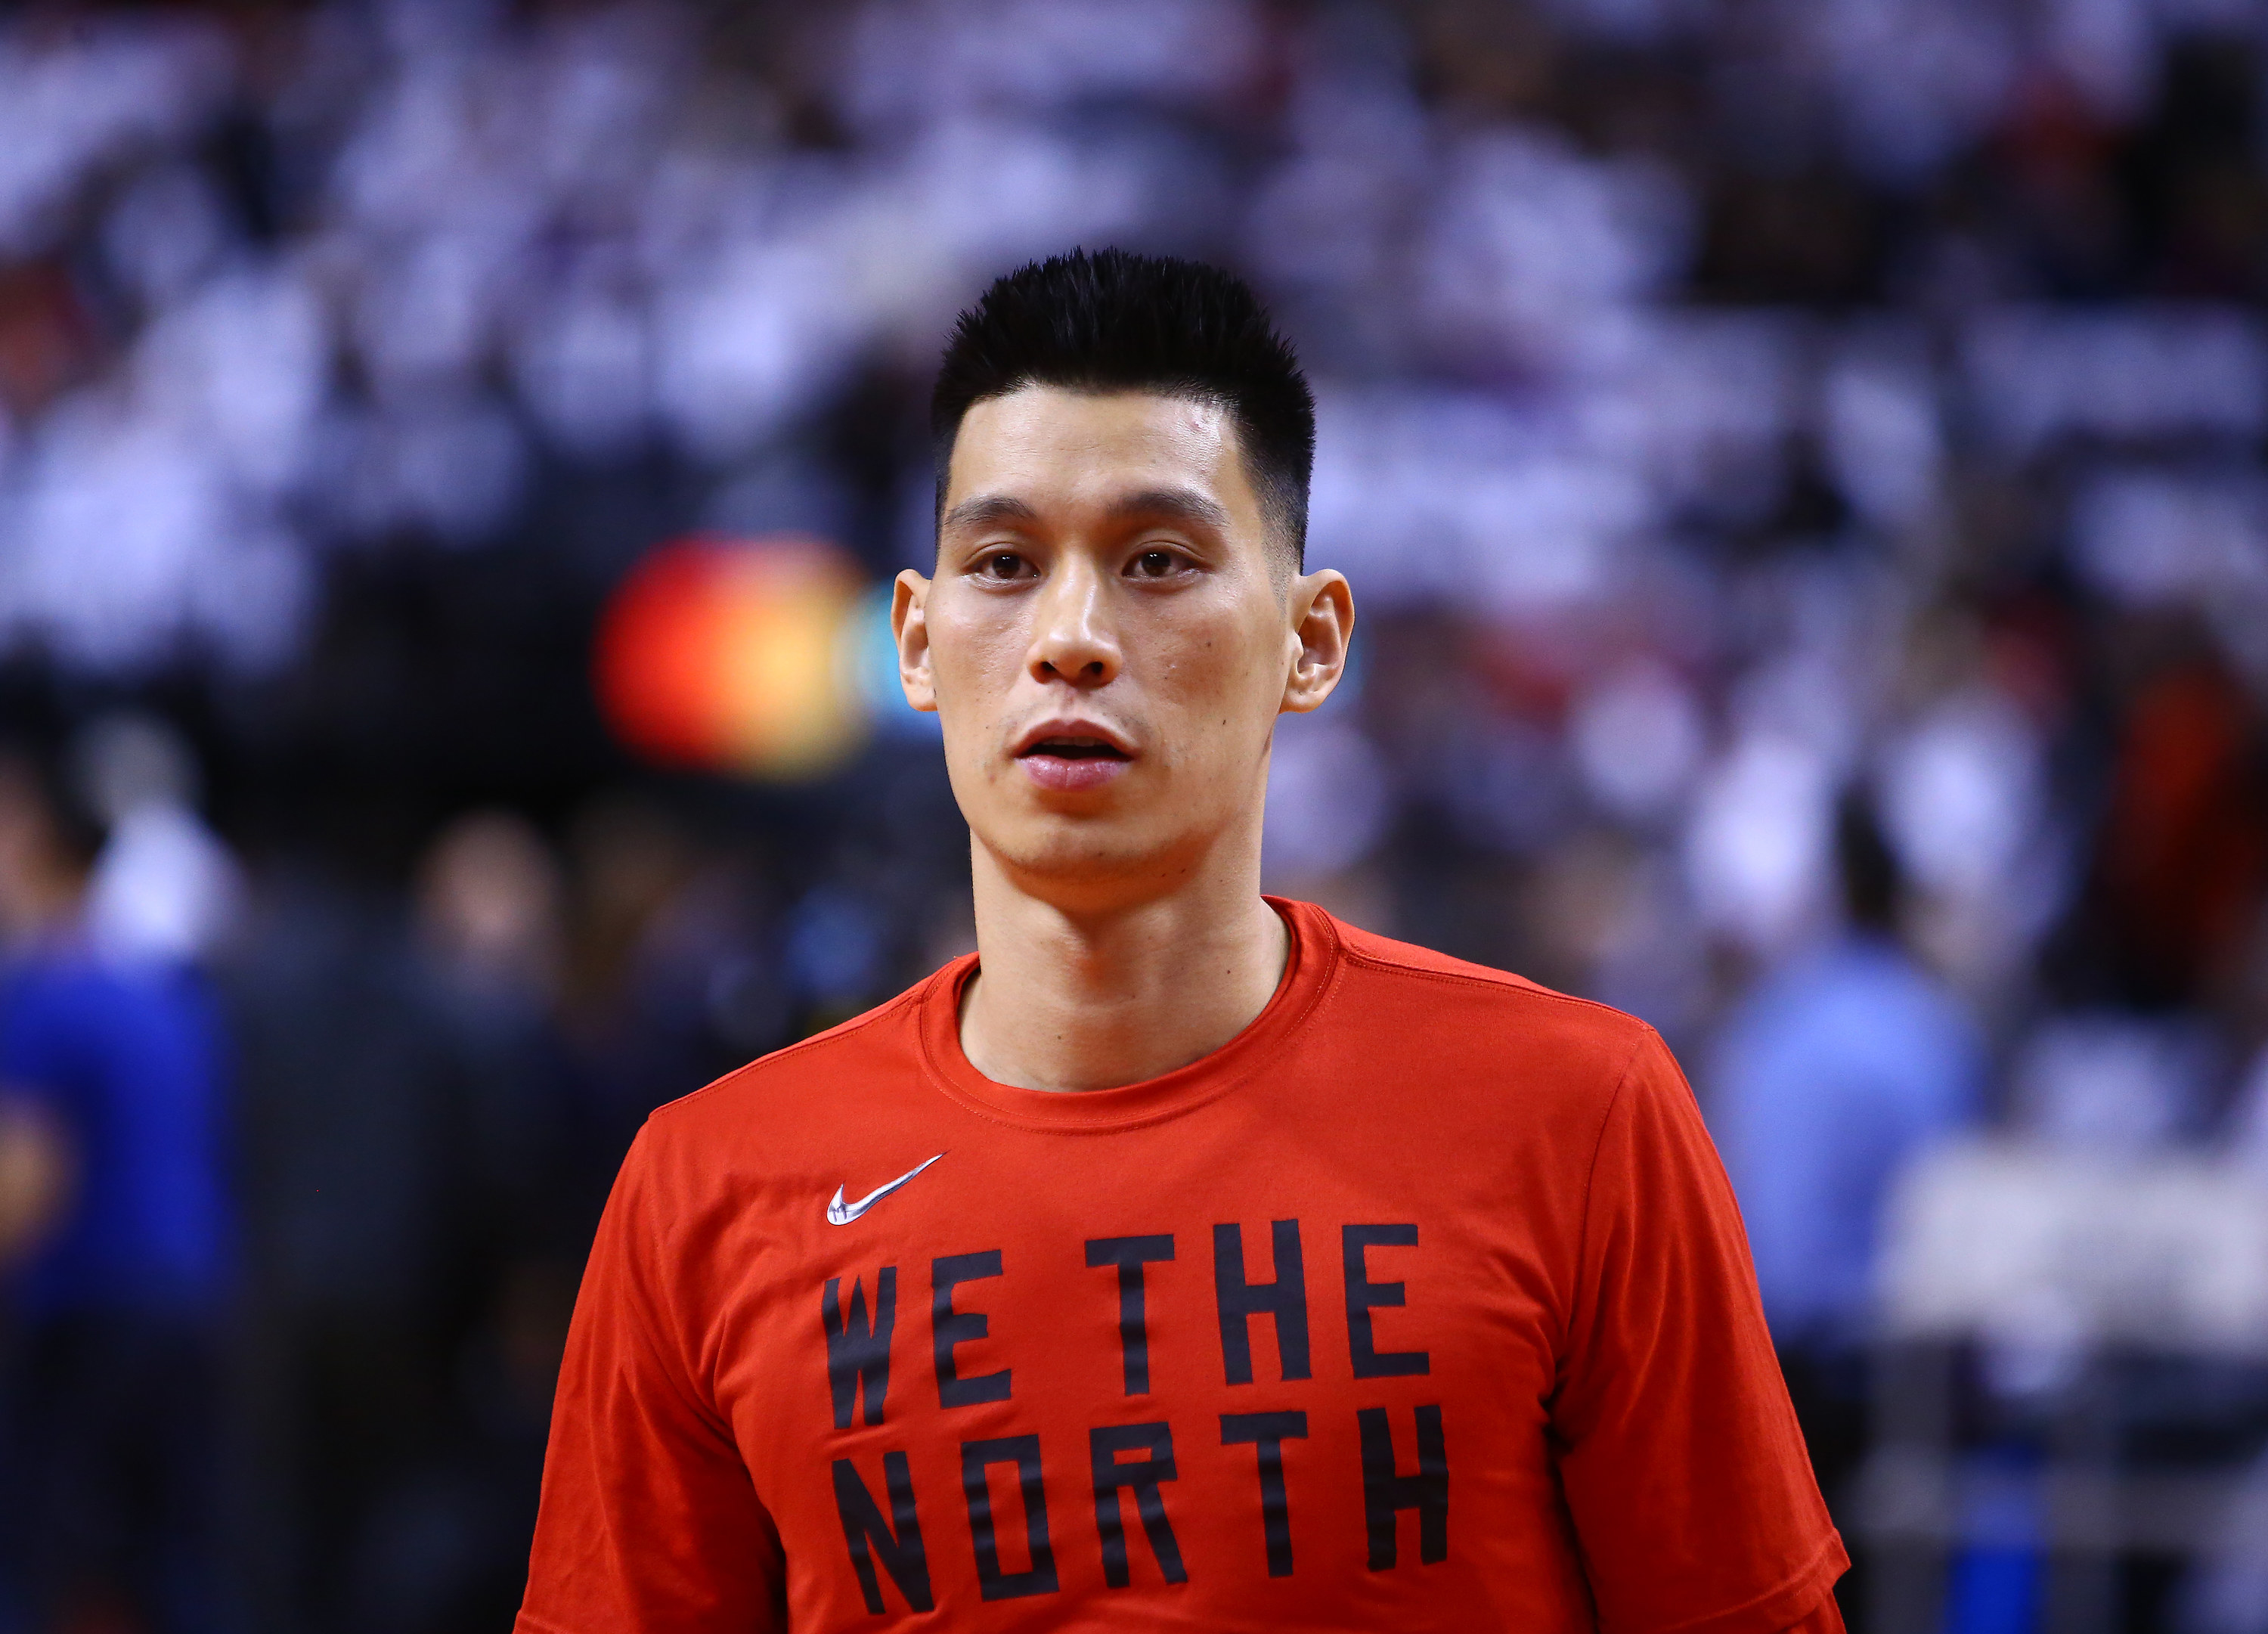 Jeremy Lin in a &quot;We the North&quot; shirt